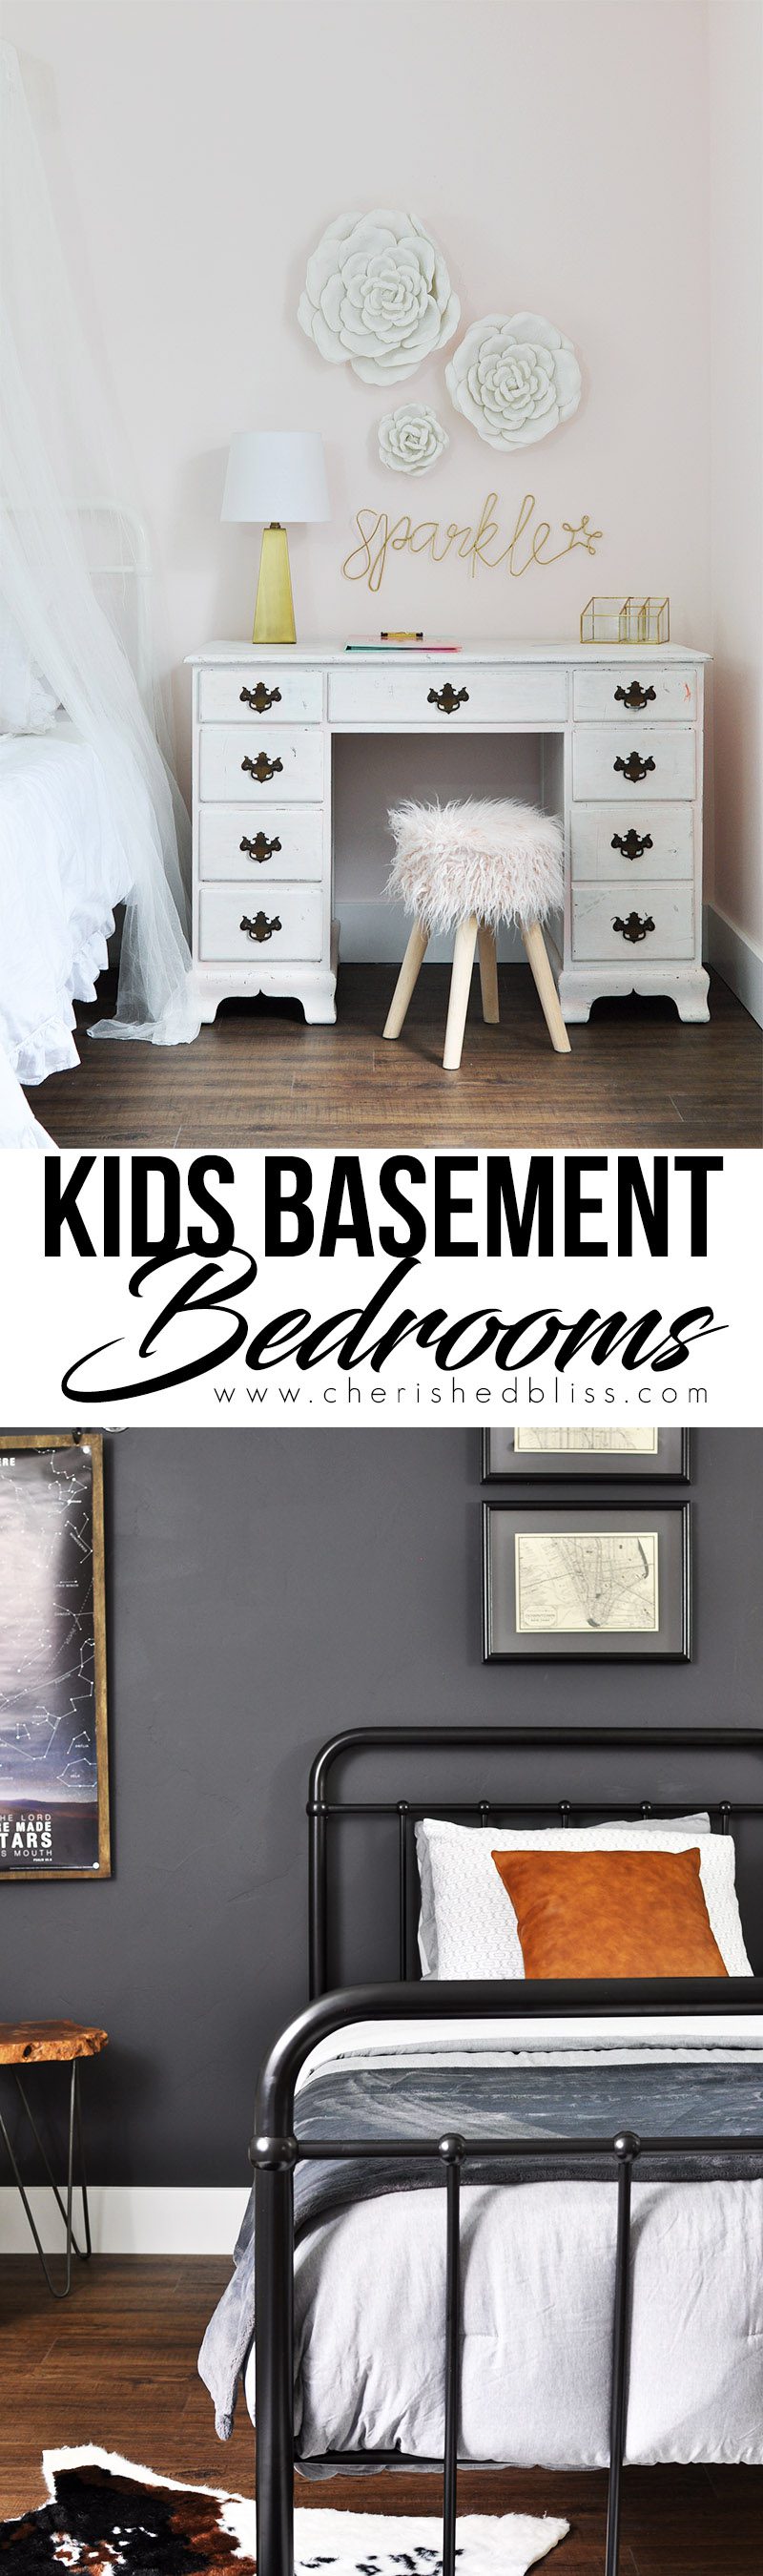 Kids Basement Bedrooms don't have to be ugly and drab. Take a look at how this flooring transformed this space into something truly amazing!